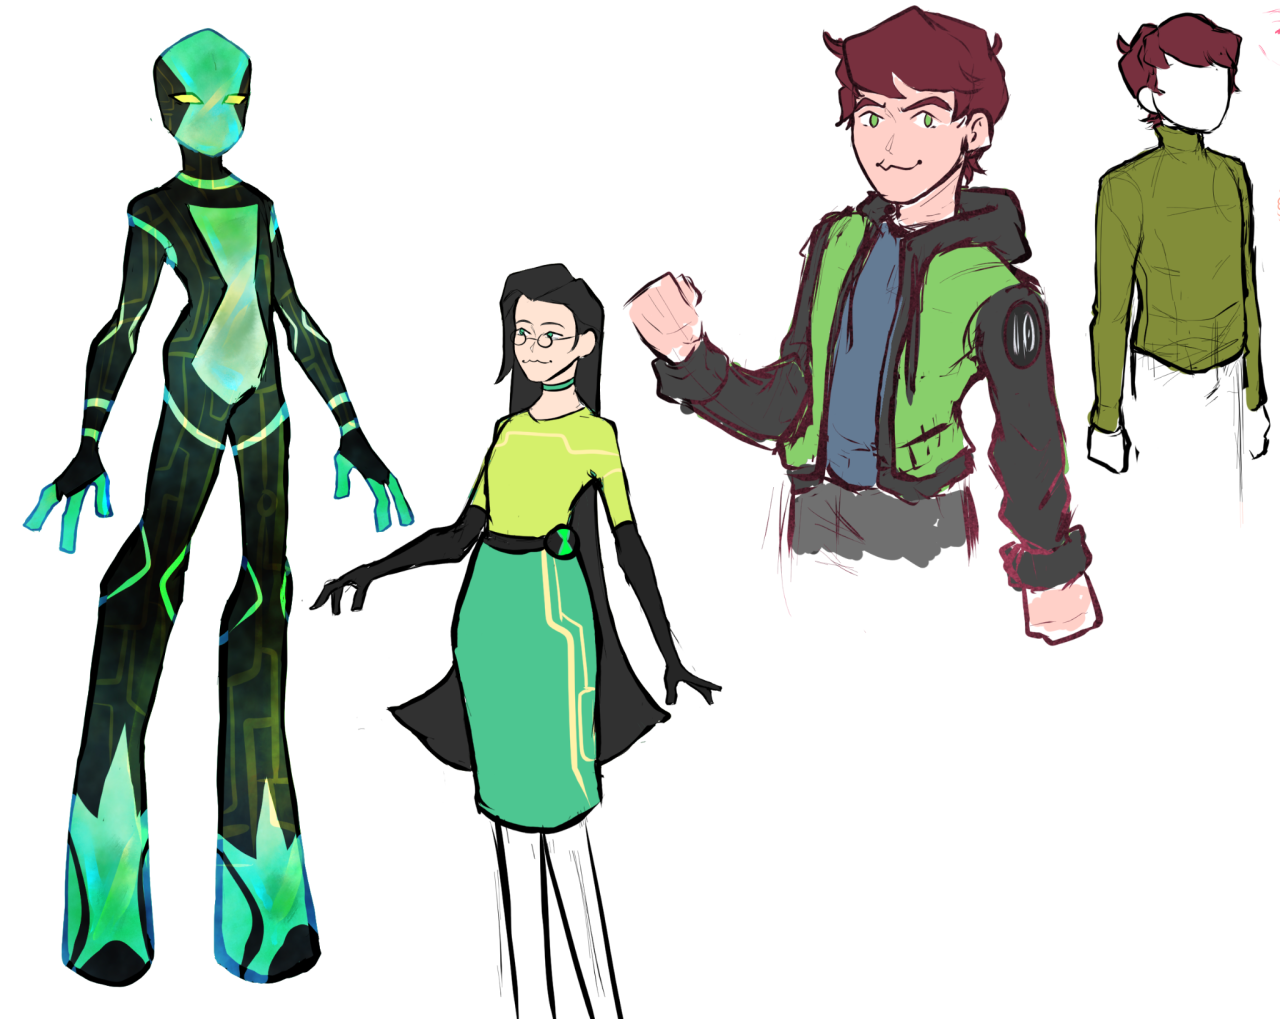 BEN 10 REBOOT ⁉️ - - - Ben is pretty much the only character I changed haha  Gwen just had a tiny change and kevin pretty much remains the…